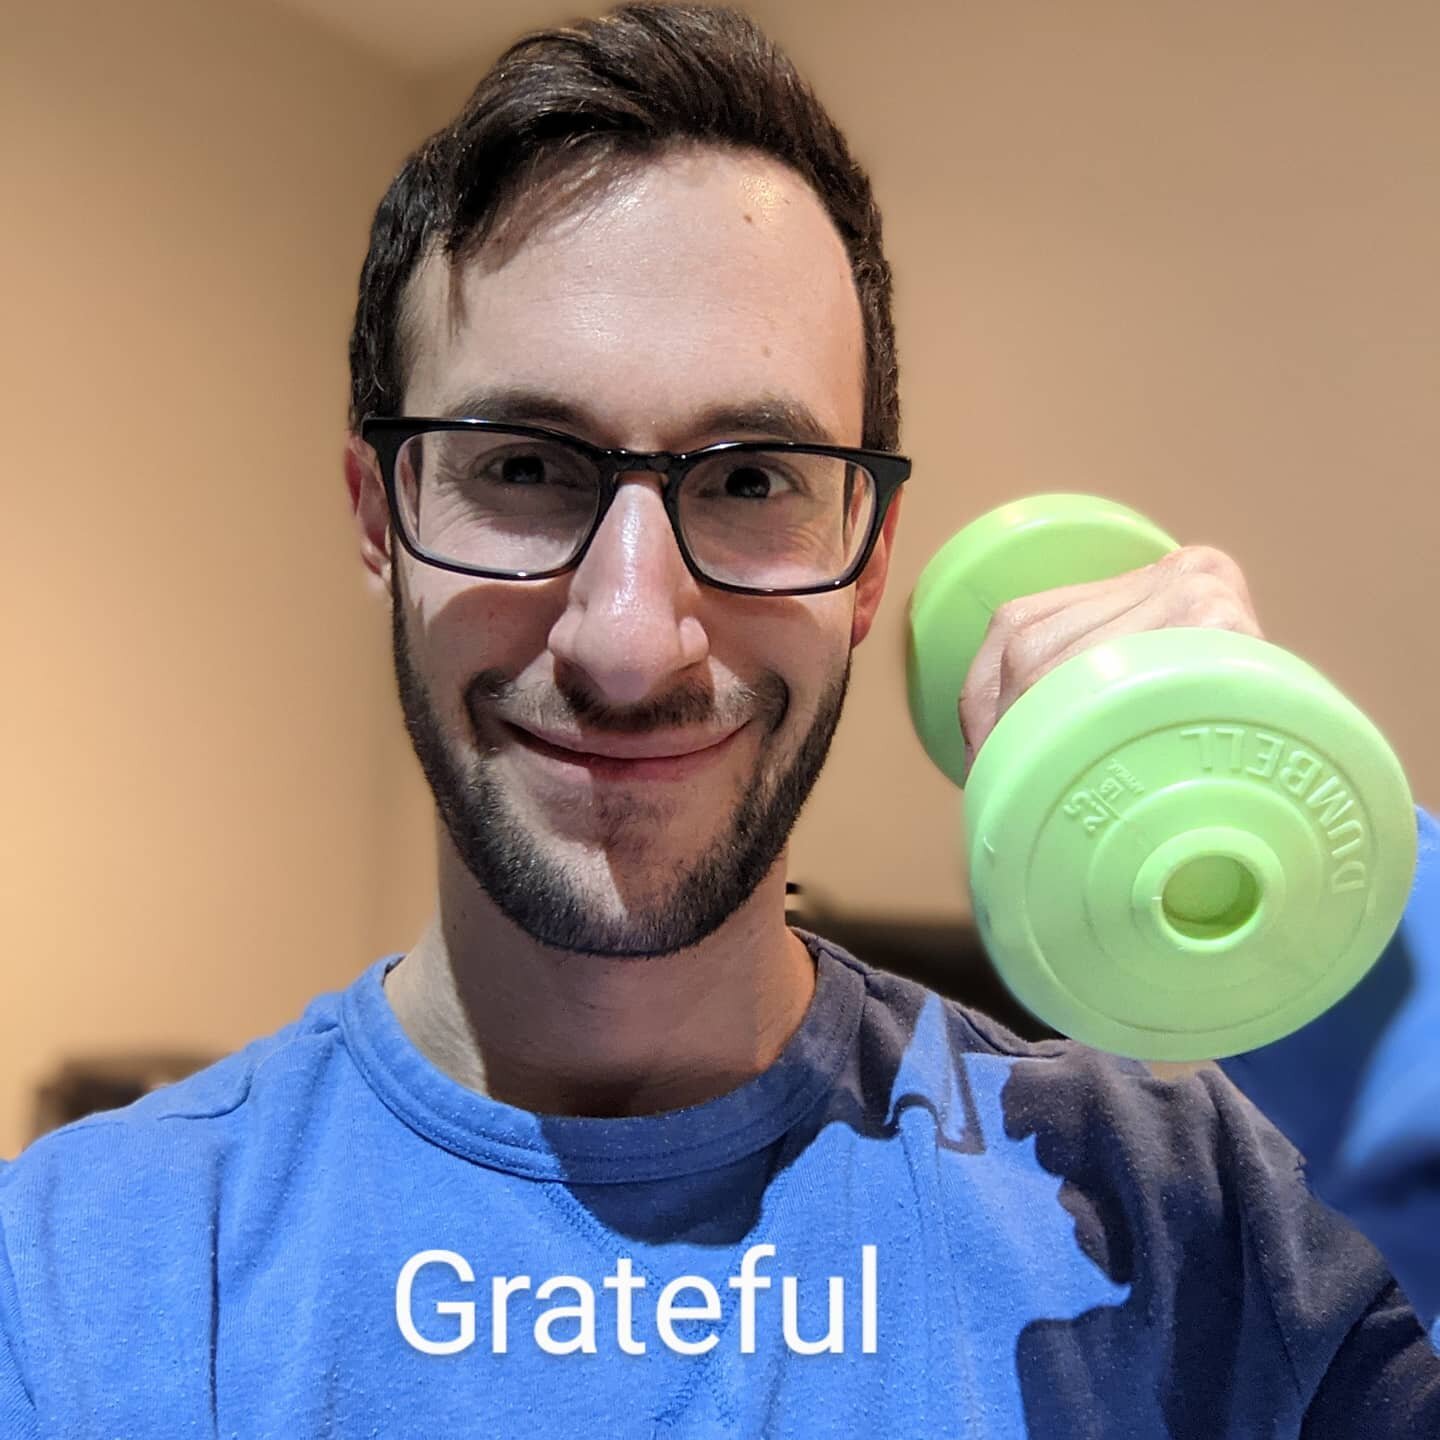 Mental Health Monday

I want to talk about gratitude one more time this week because it is such a powerful tool. 

It seems silly, but finding a couple things that you are grateful for everyday can have huge positive effects on your health in the lon